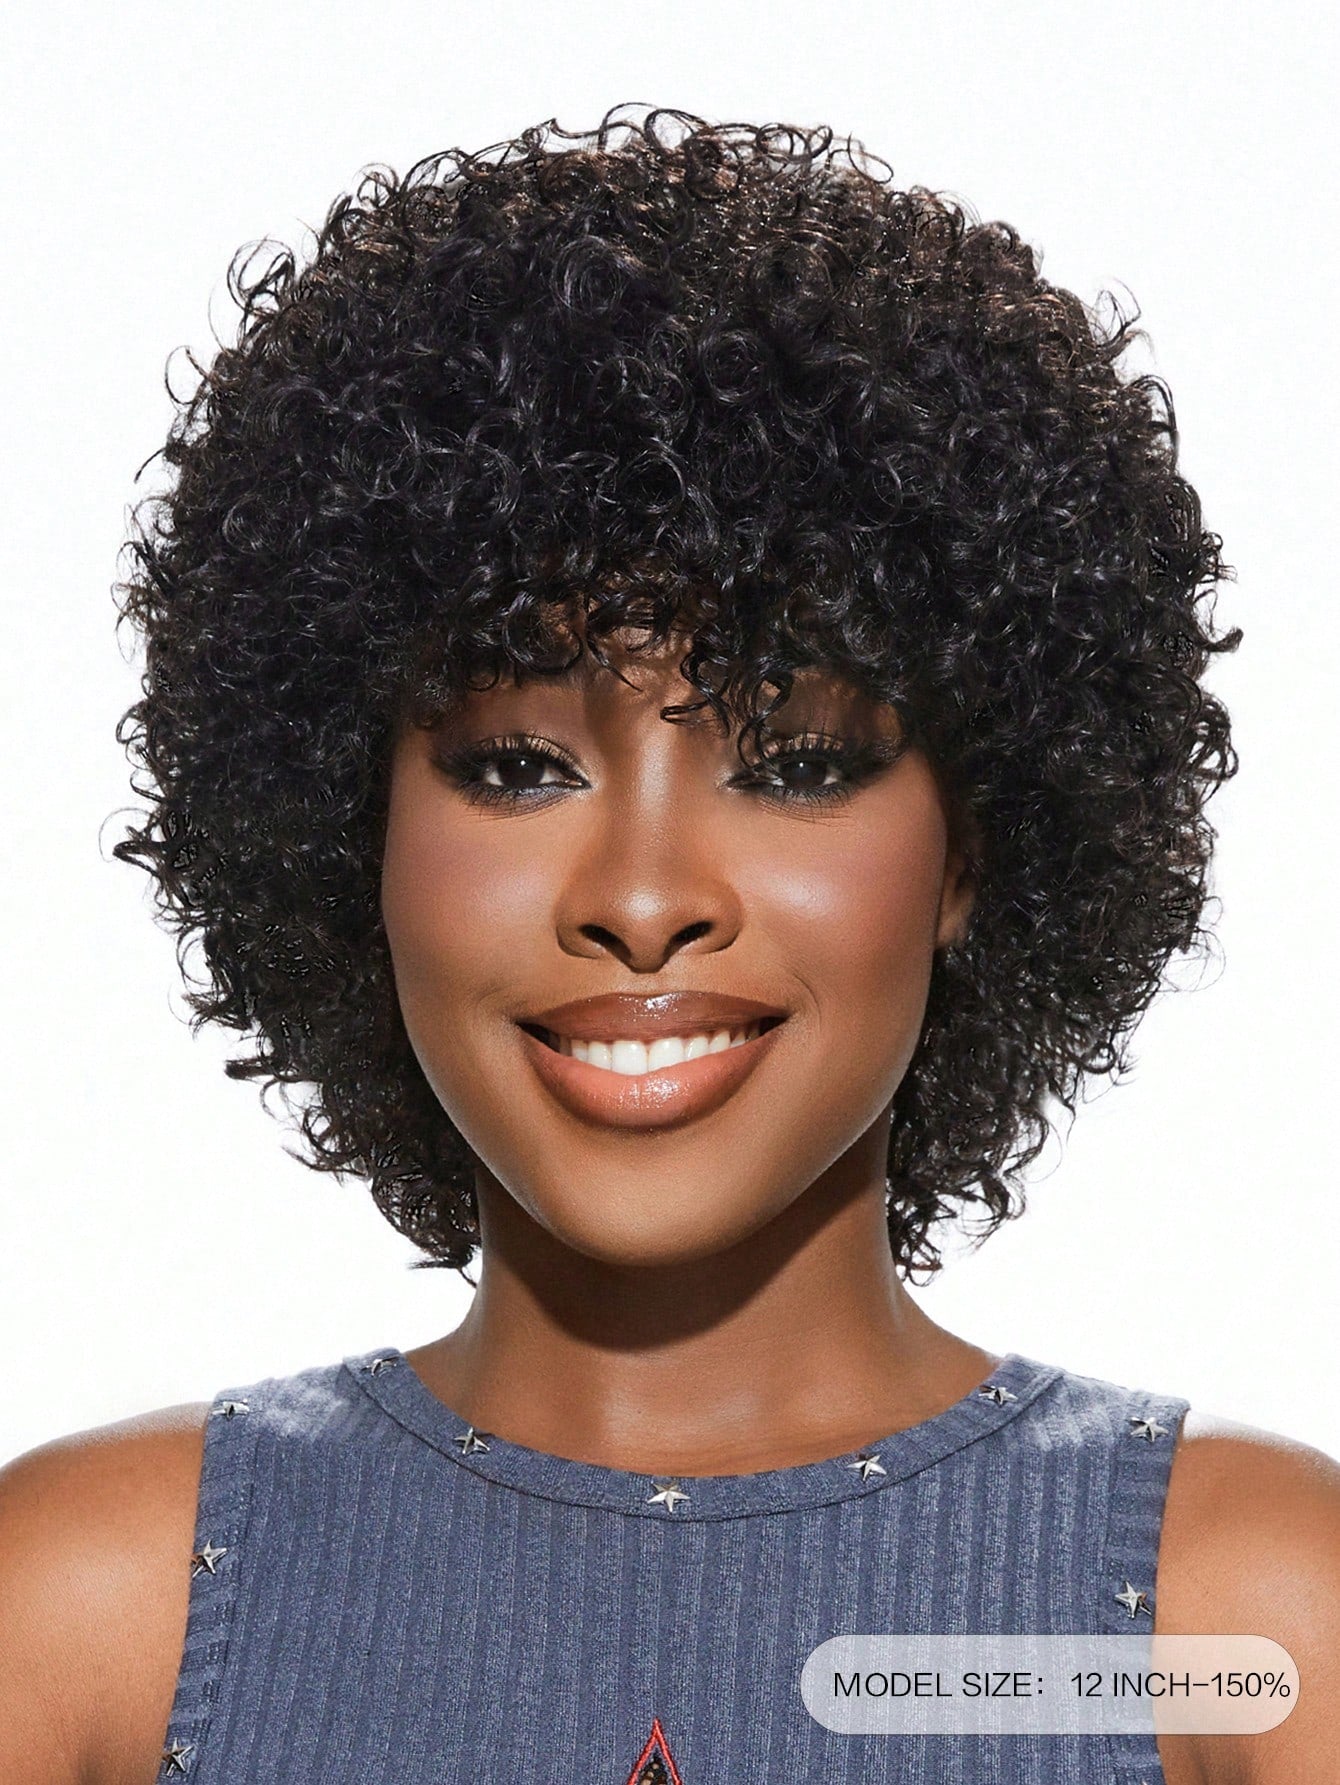 Curly Wigs With Bangs Afro Kinky Curly Big Bouncy Short Human Hair Wig Natural Black Color